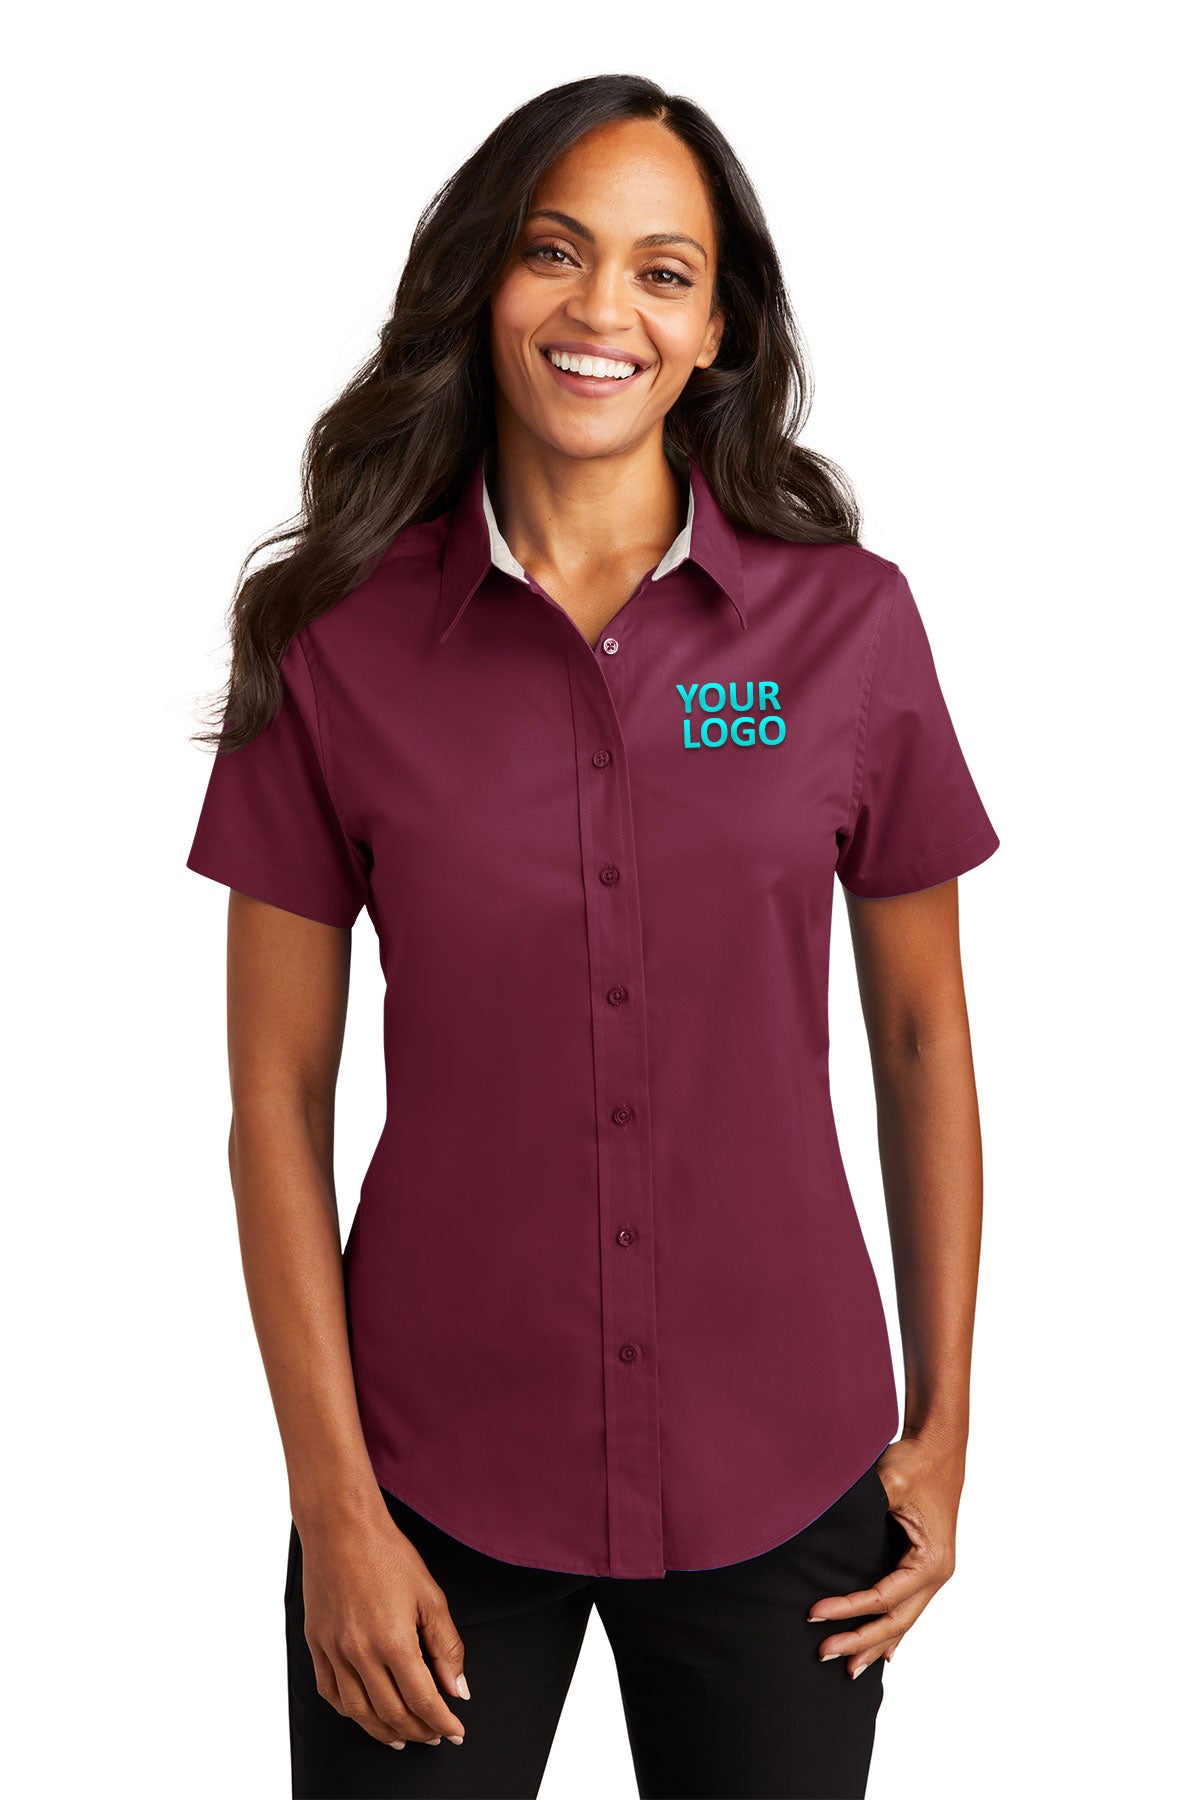 Port Authority Burgundy/Light Stone L508 order embroidered polo shirts